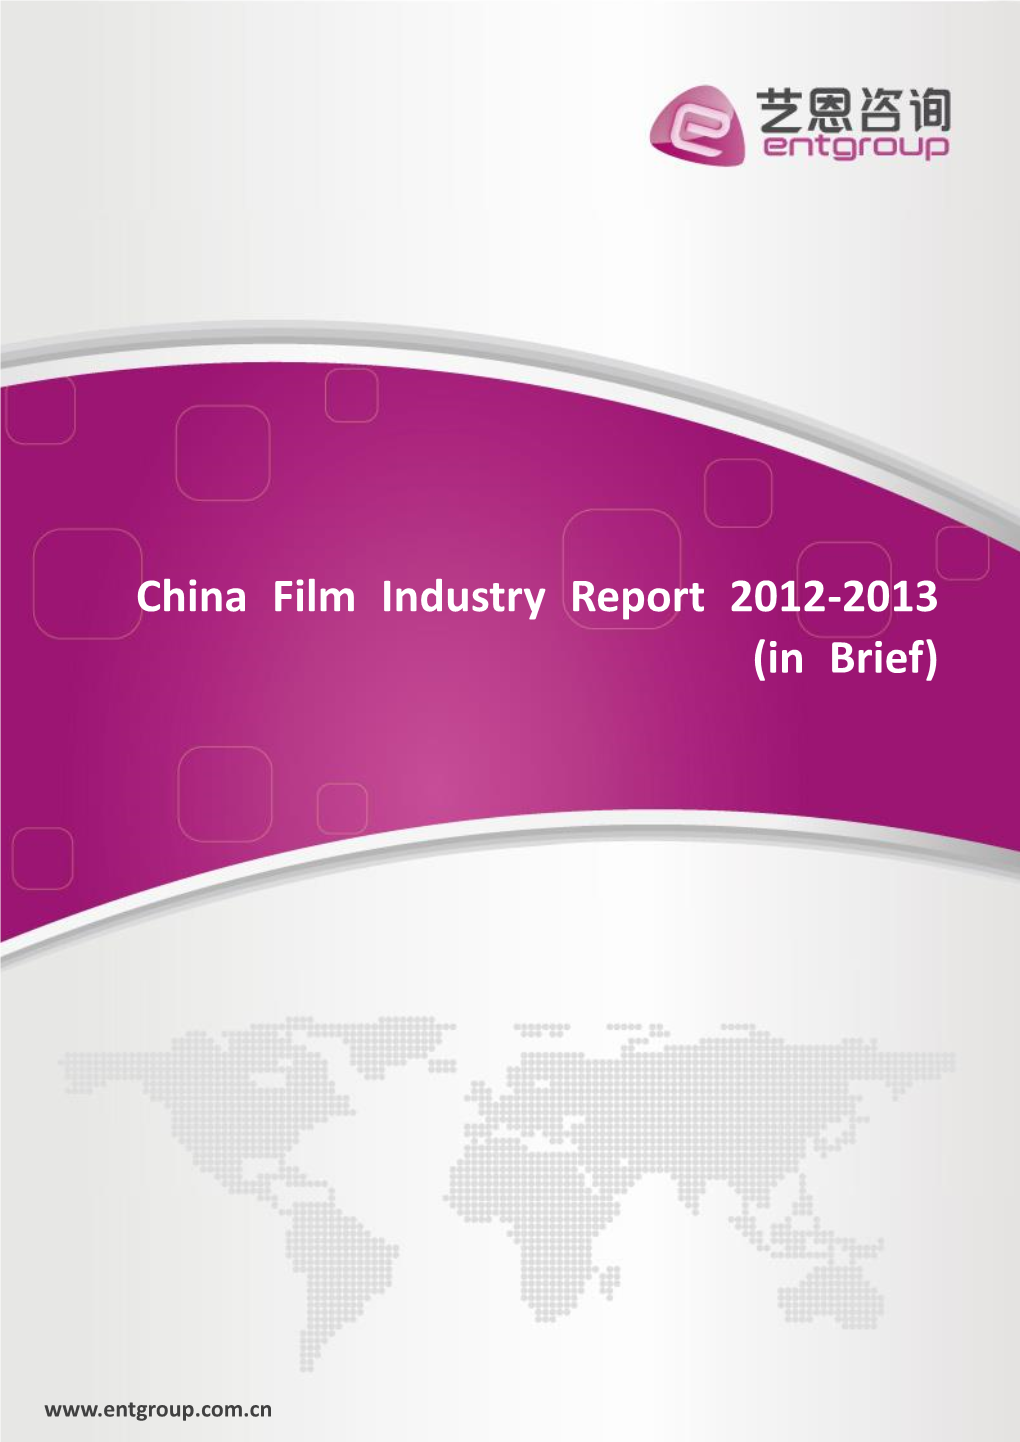 China Film Industry Report 2012-2013 (In Brief)